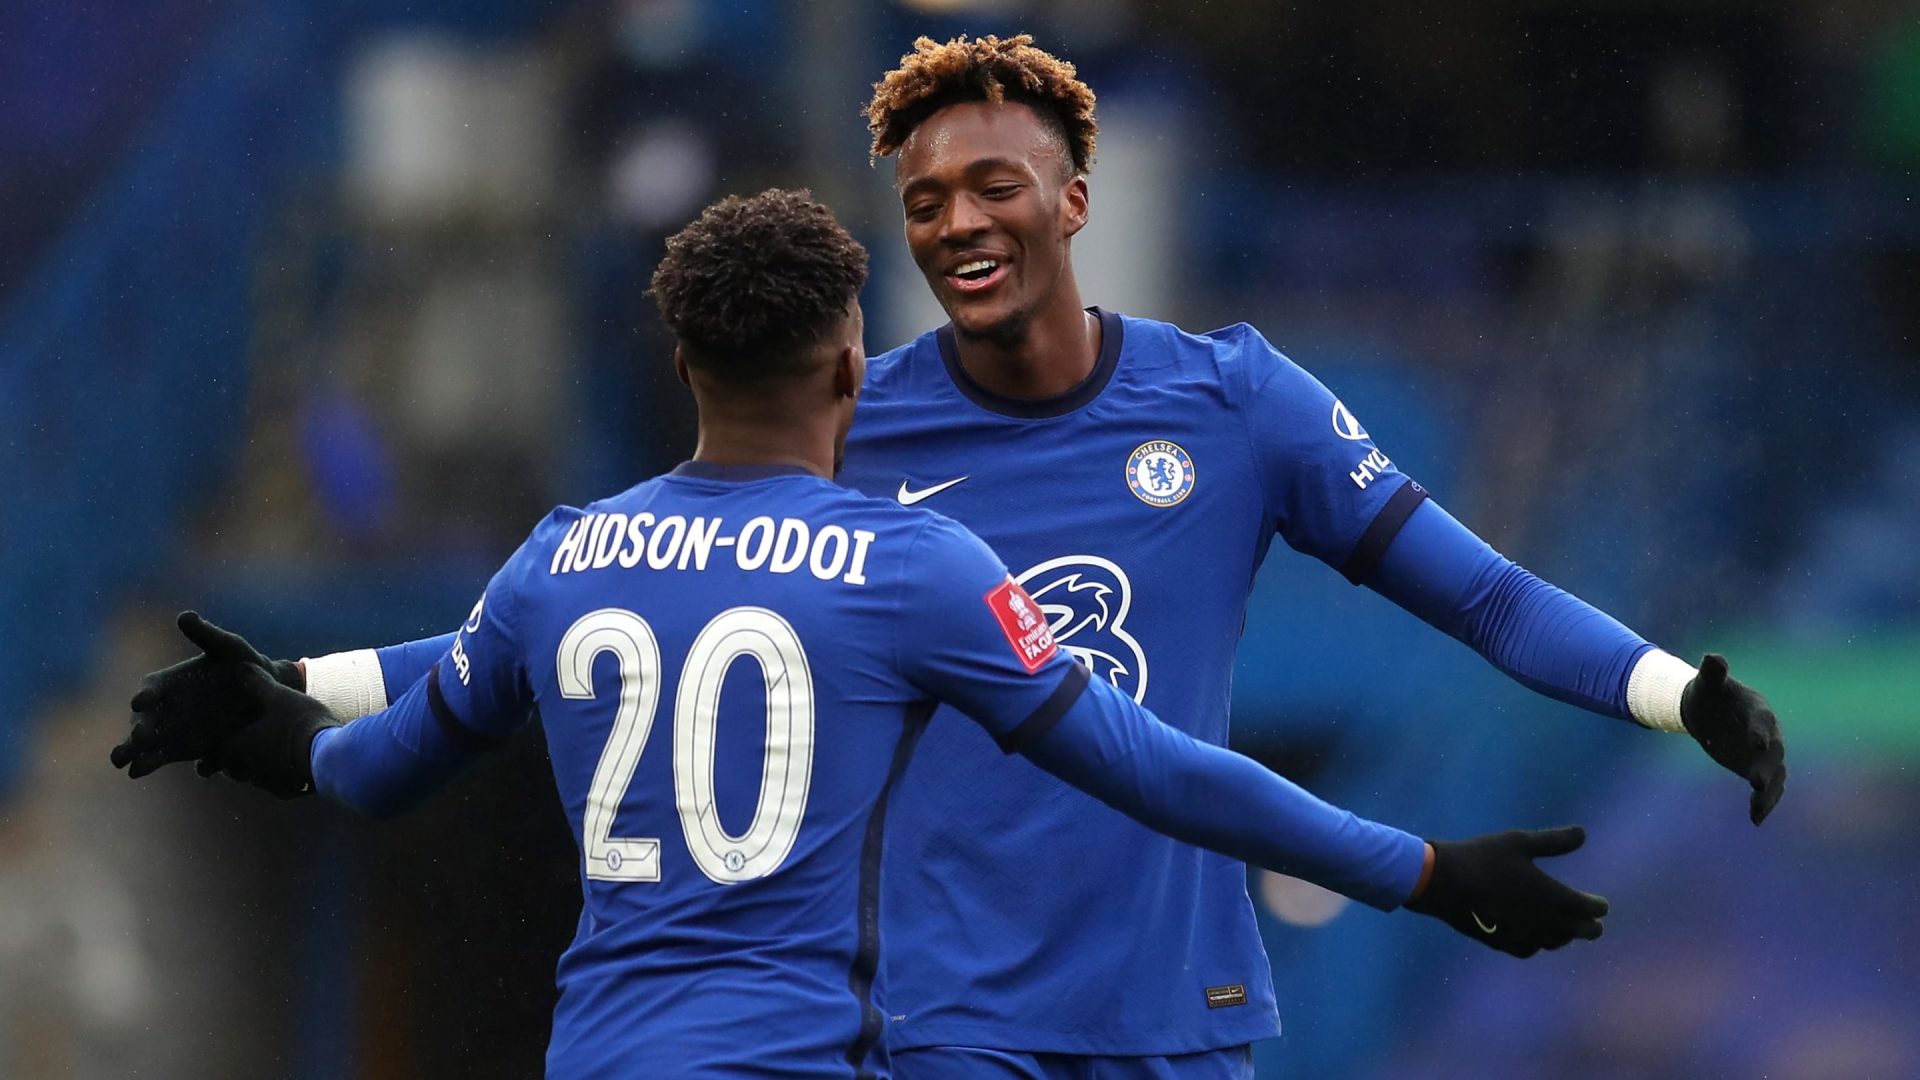 Chelsea 3-1 Luton: Player scores as Tammy Abraham hat-trick fires Blues into fifth spherical